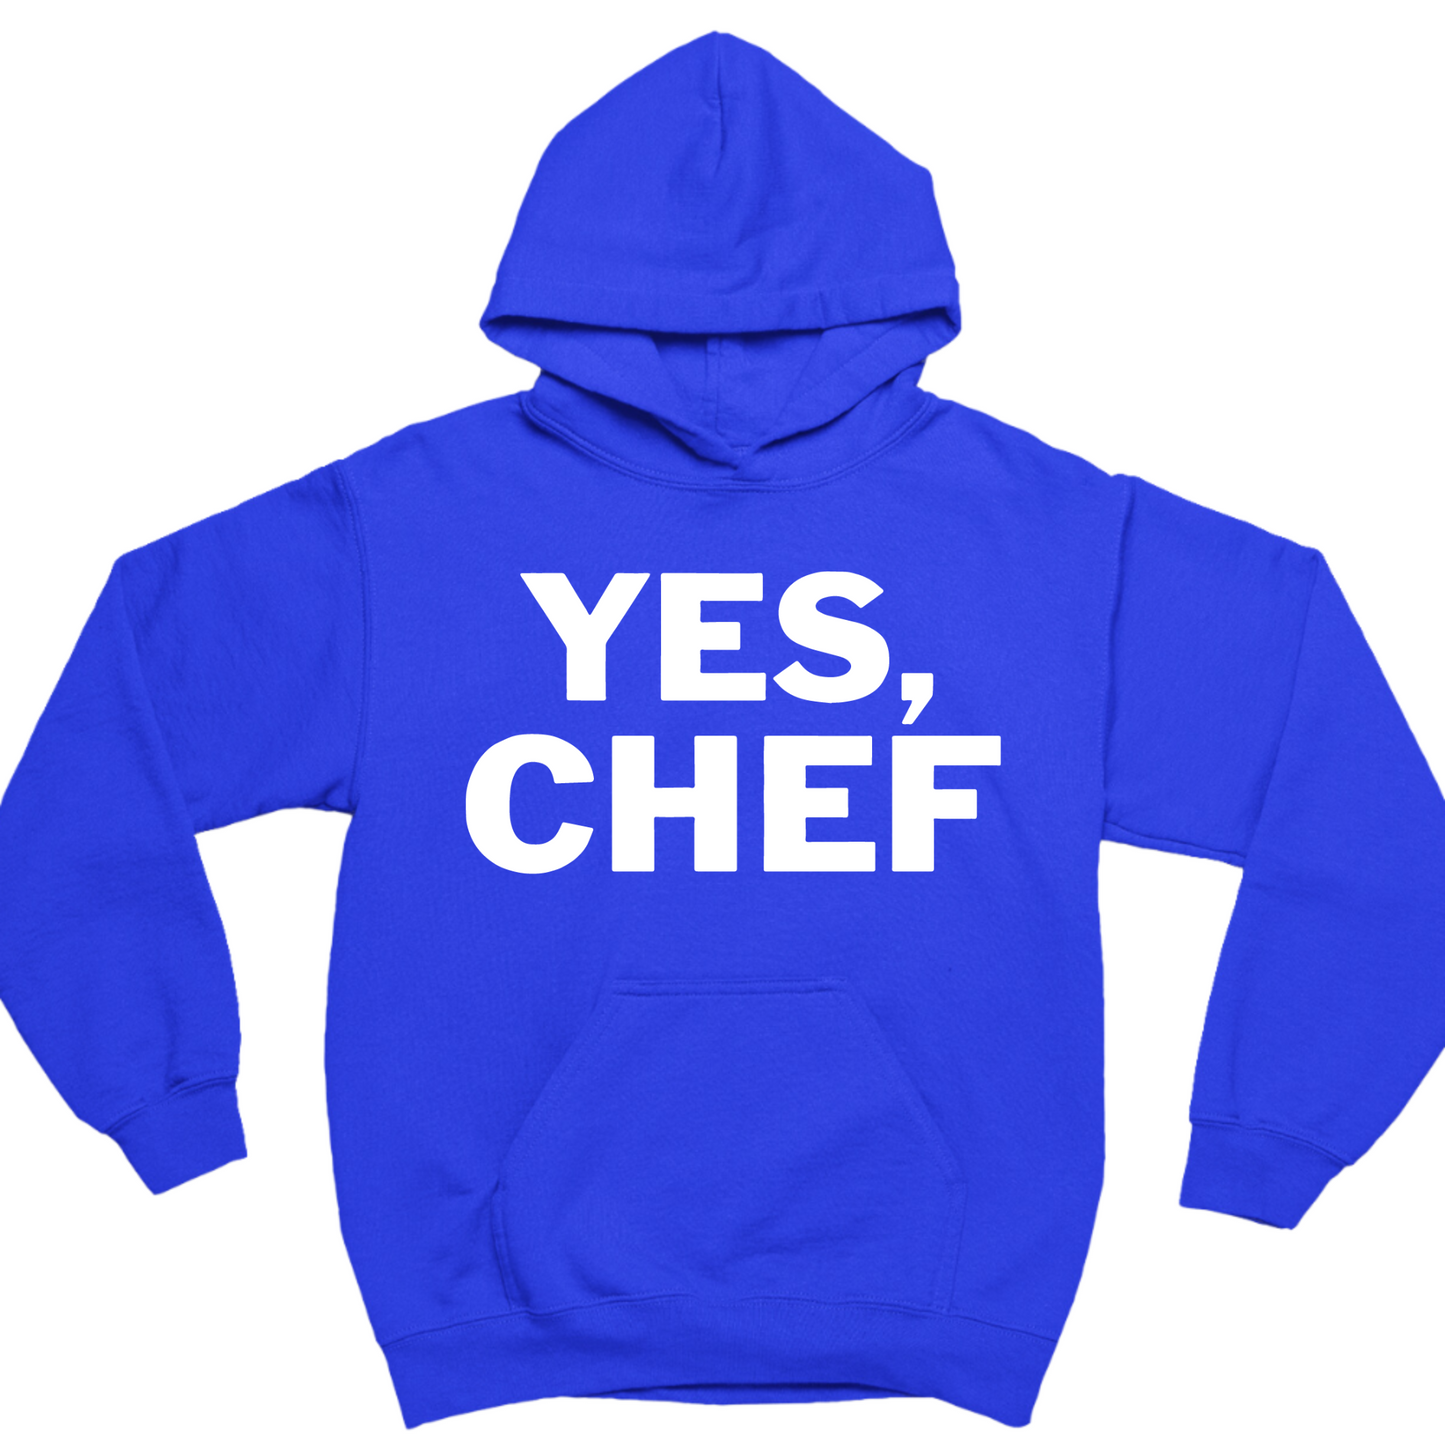 Yes Chef Hoodie